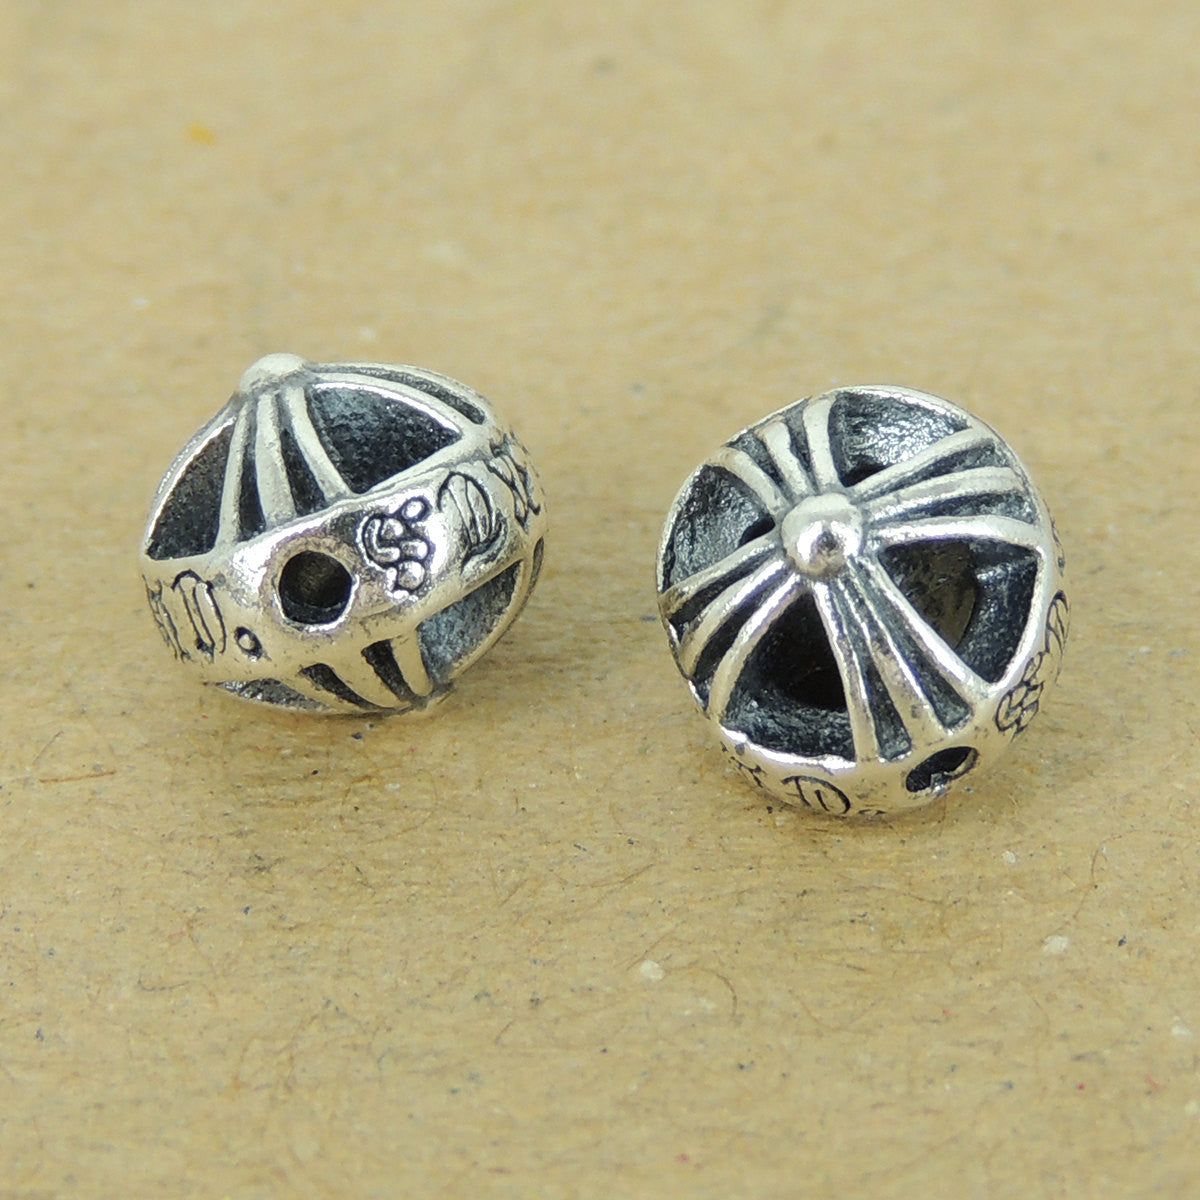 2 PCS Double-Sided Round Celtic Cross Beads - S925 Sterling Silver WSP440X2